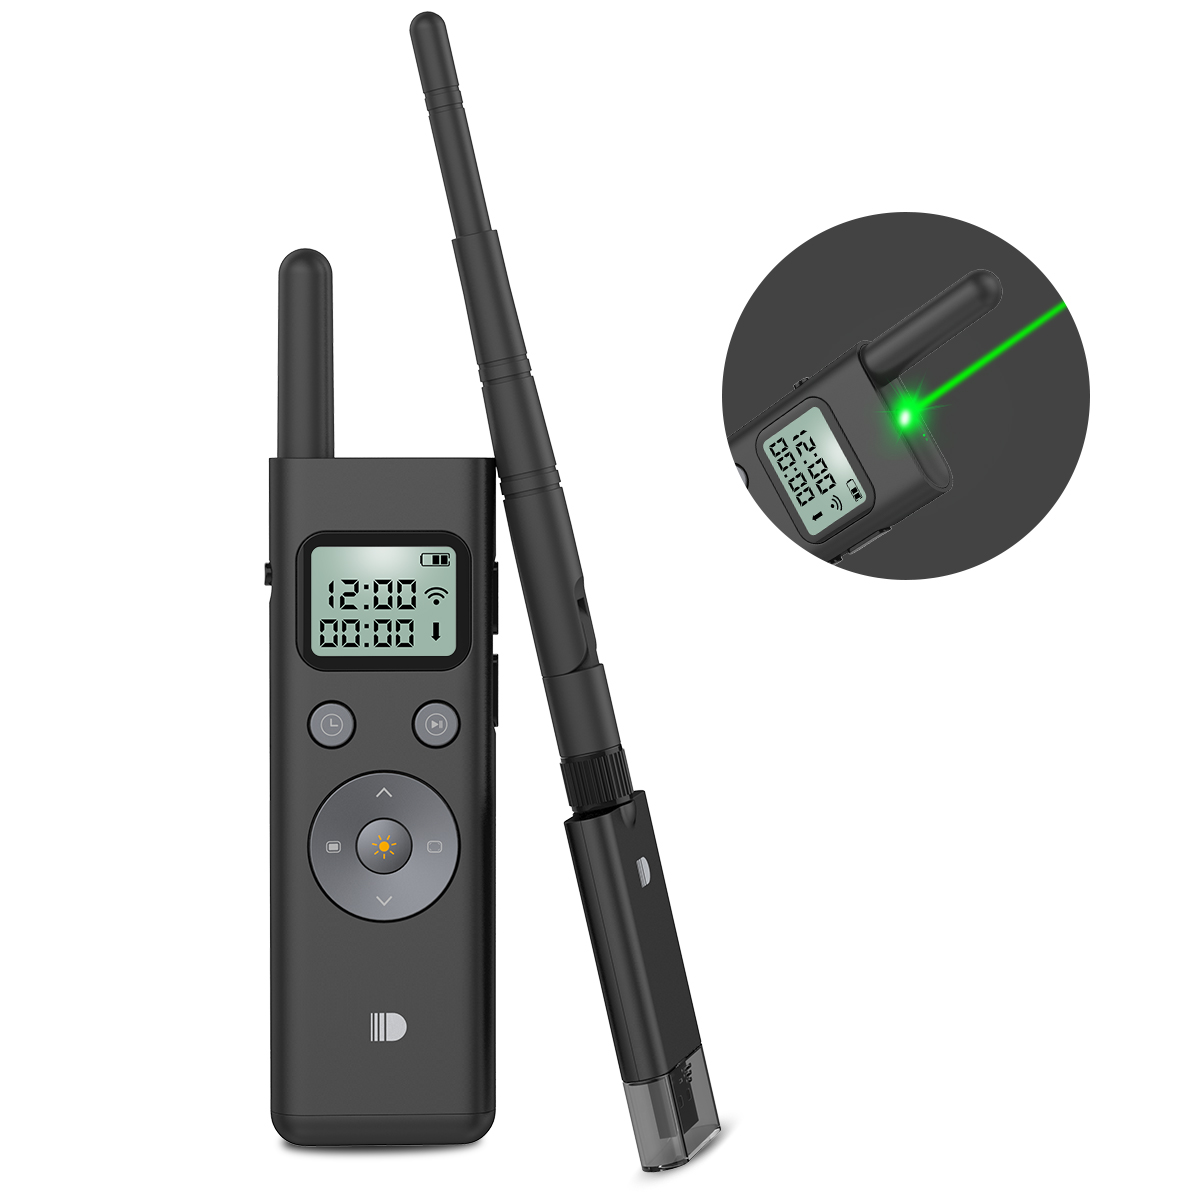 DSIT037---300M Wireless Presenter, Doosl Presentation Remote with Green Laser Up to 1000 Feet Working Range for Conference Lecture Training Speech